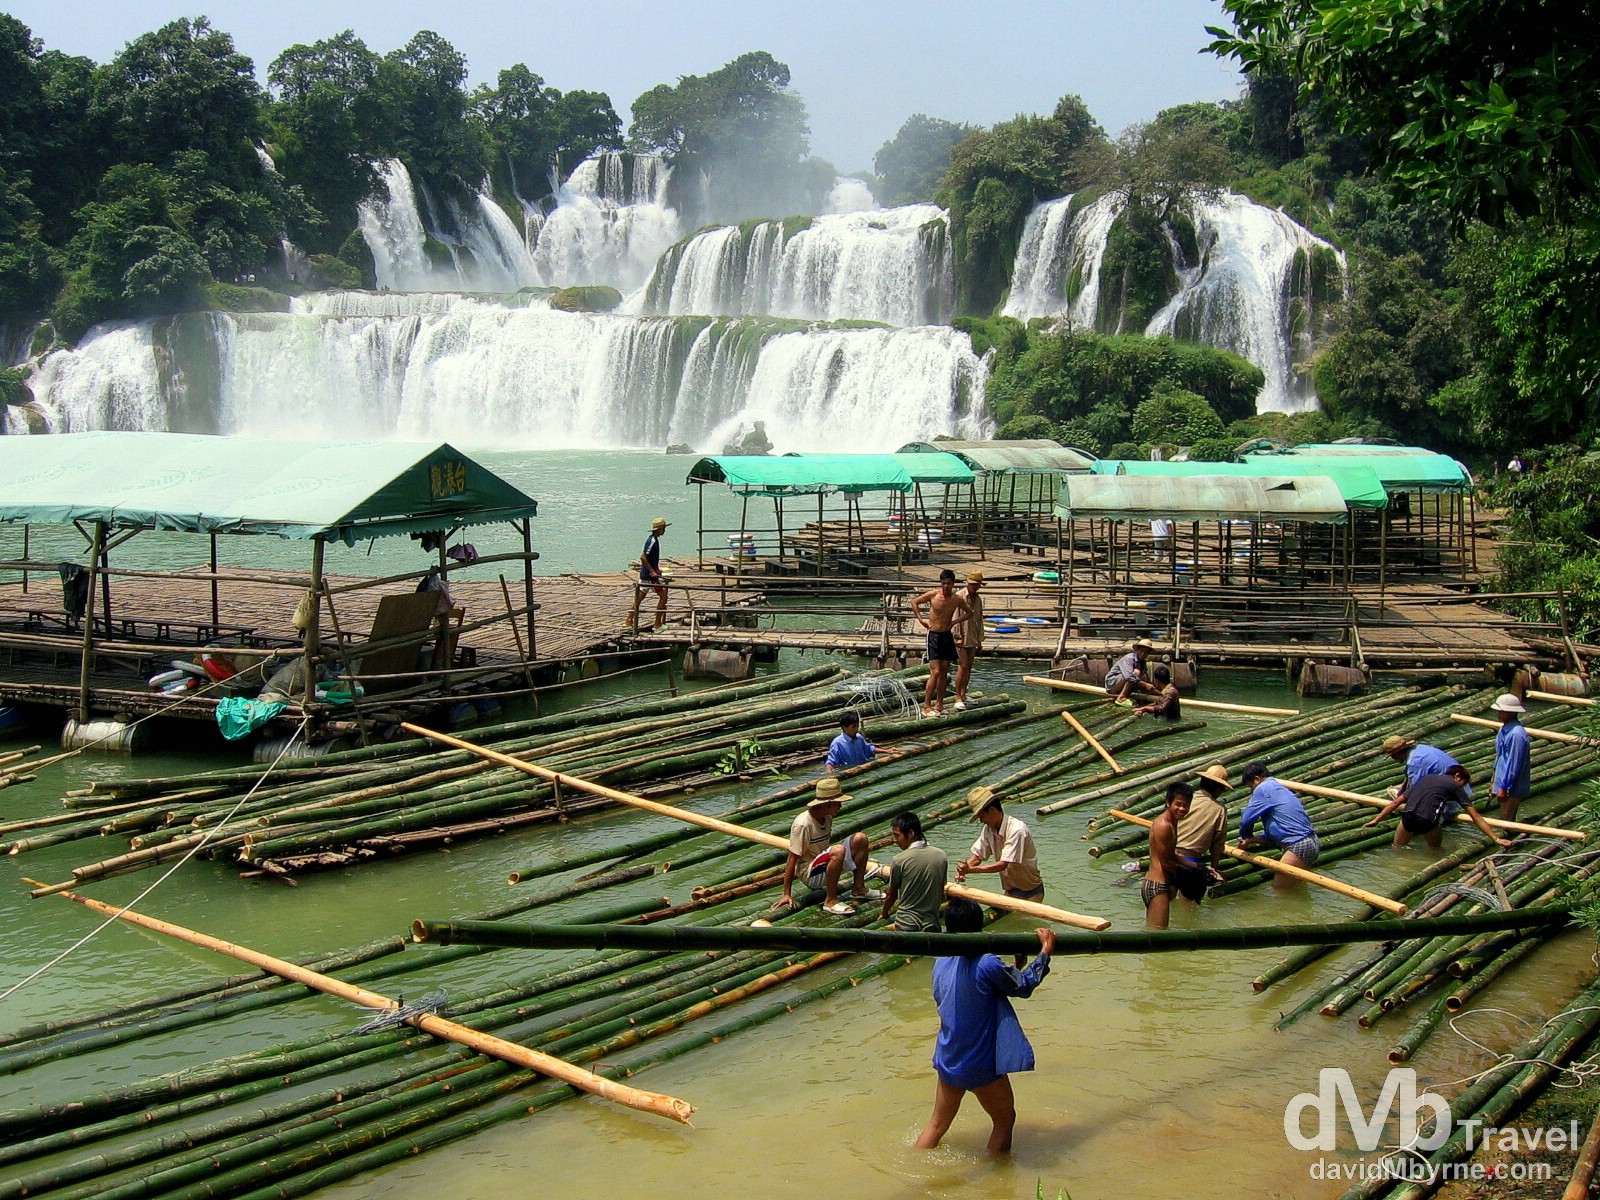 Workers at the Detian falls straddling the China-Vietnam border, near Shuolong, southwest China. September 1, 2005.